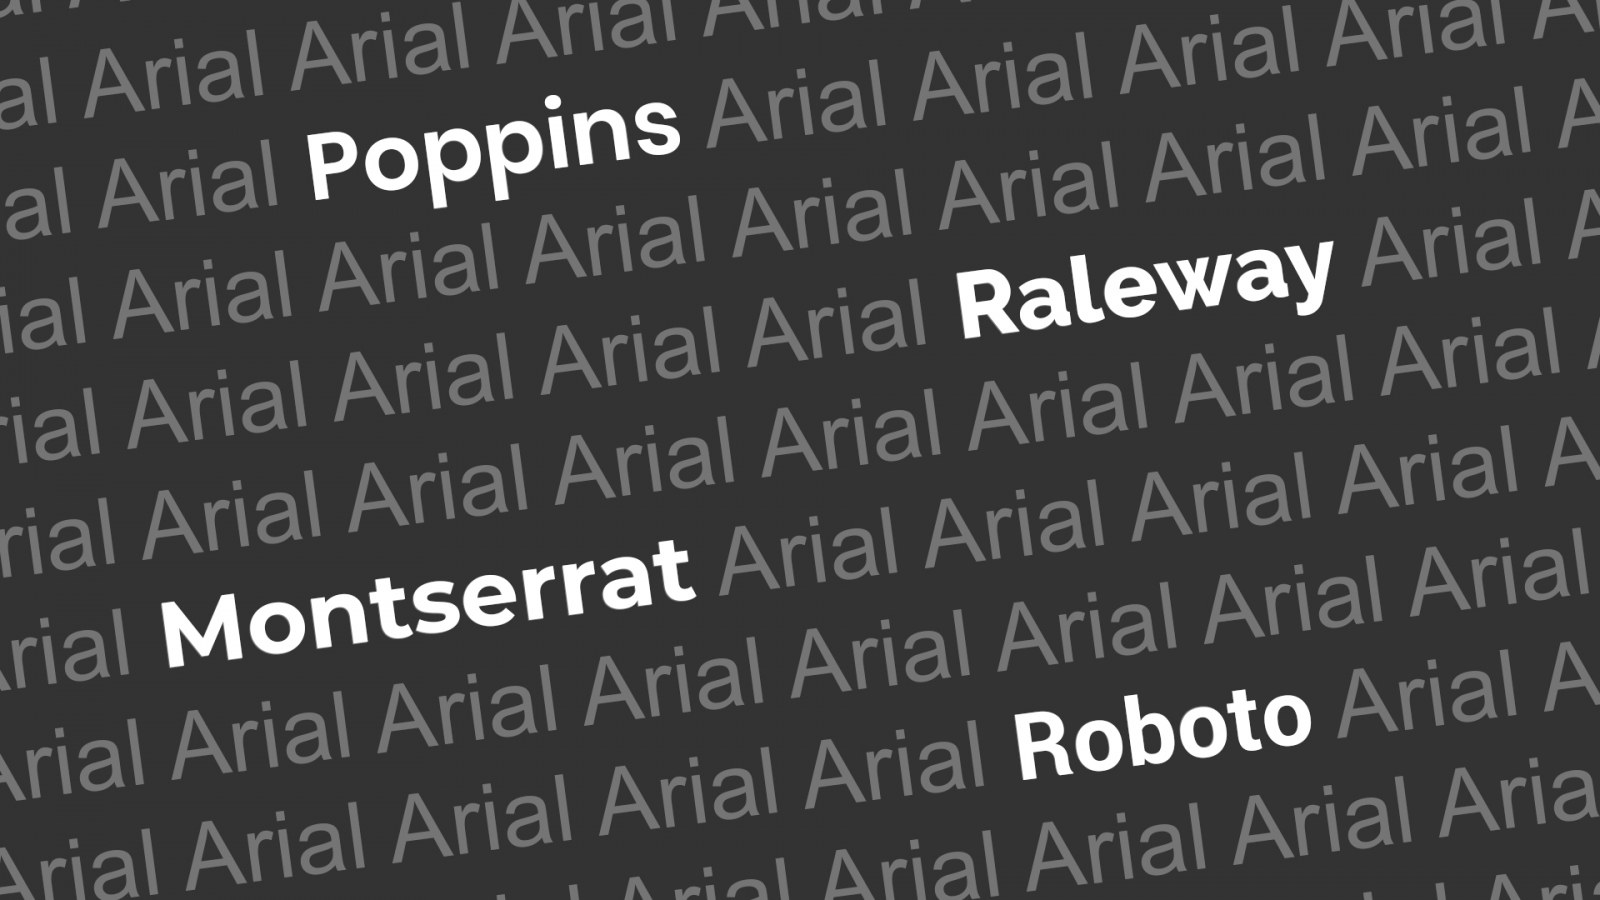 Poppins, Raleway, Montserrat and Roboto fonts standing out amongst Arial